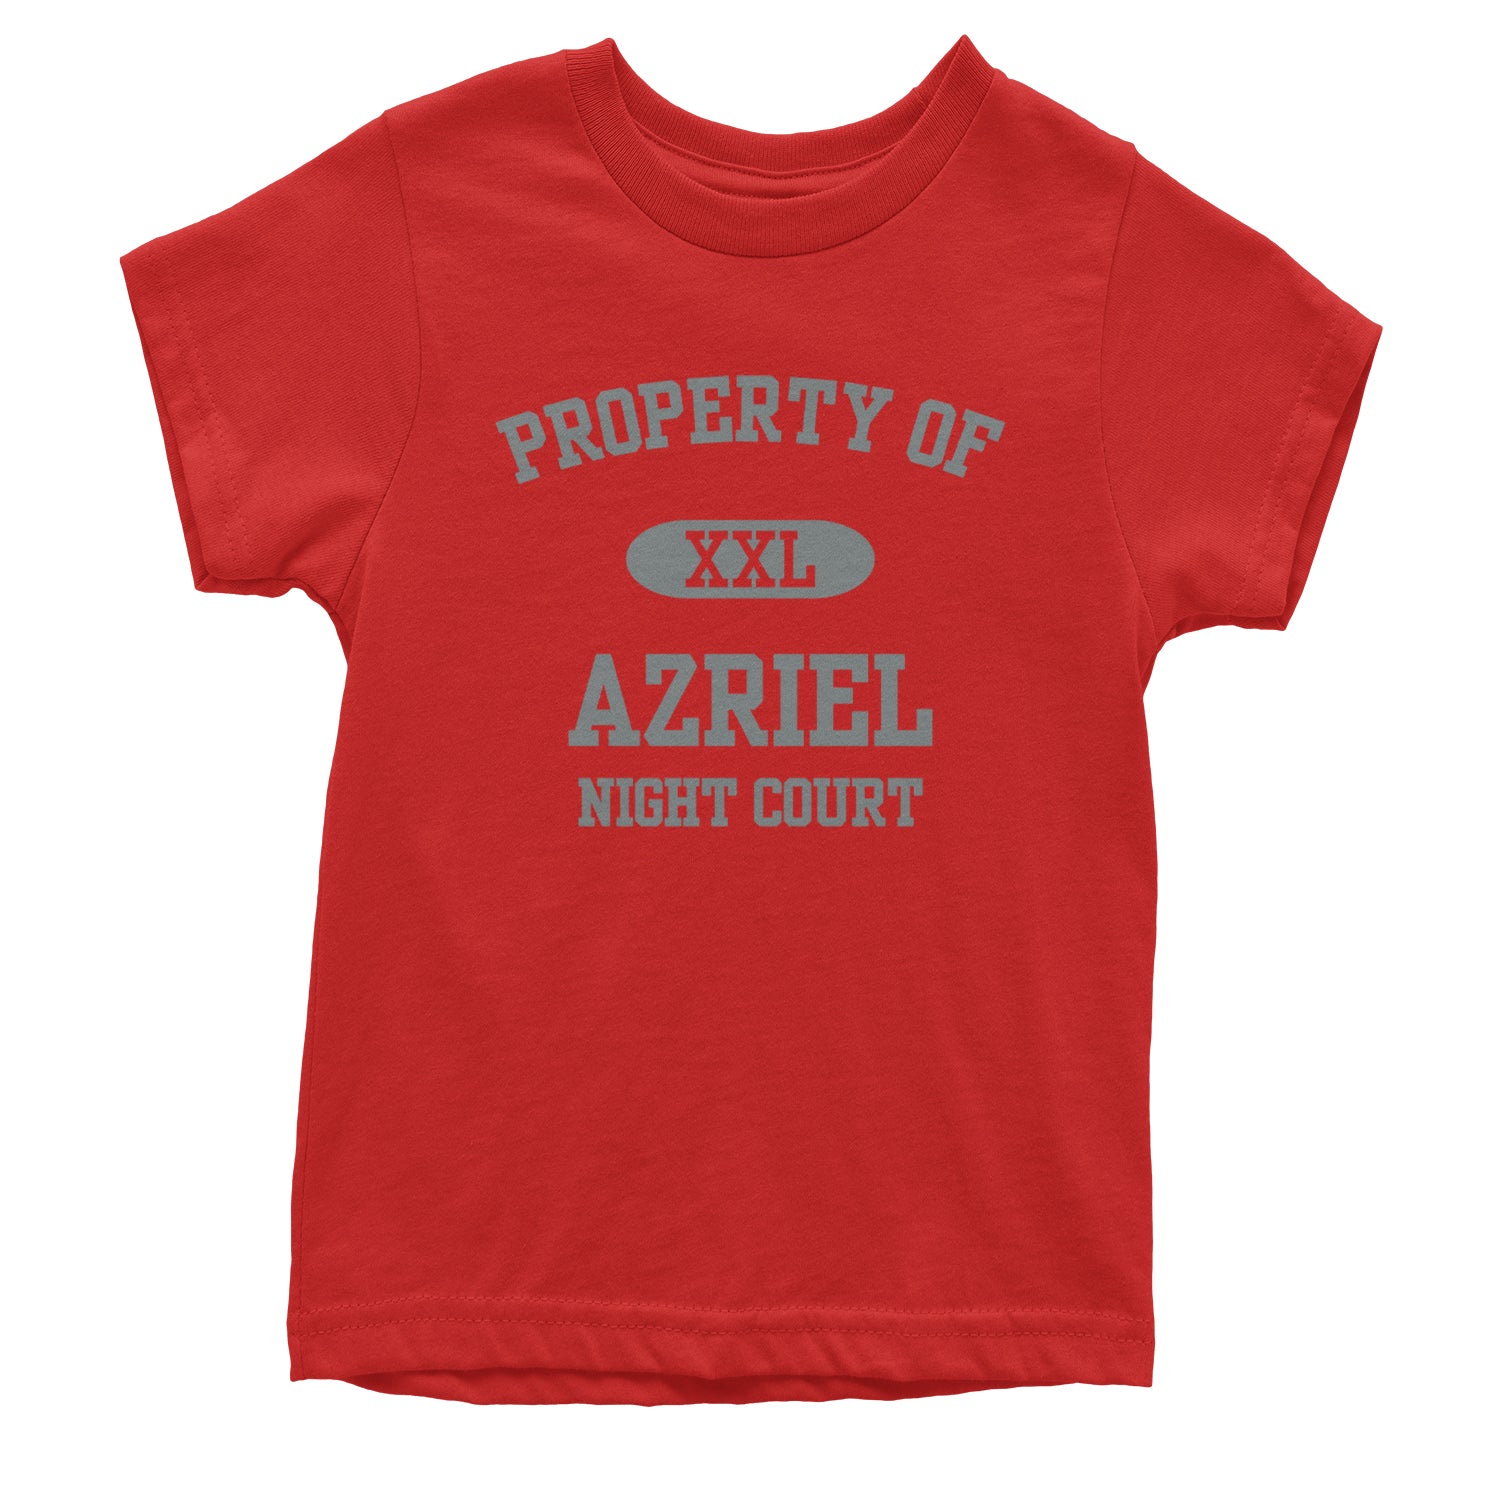 Property Of Azriel ACOTAR Youth T-shirt acotar, court, maas, tamlin, thorns by Expression Tees